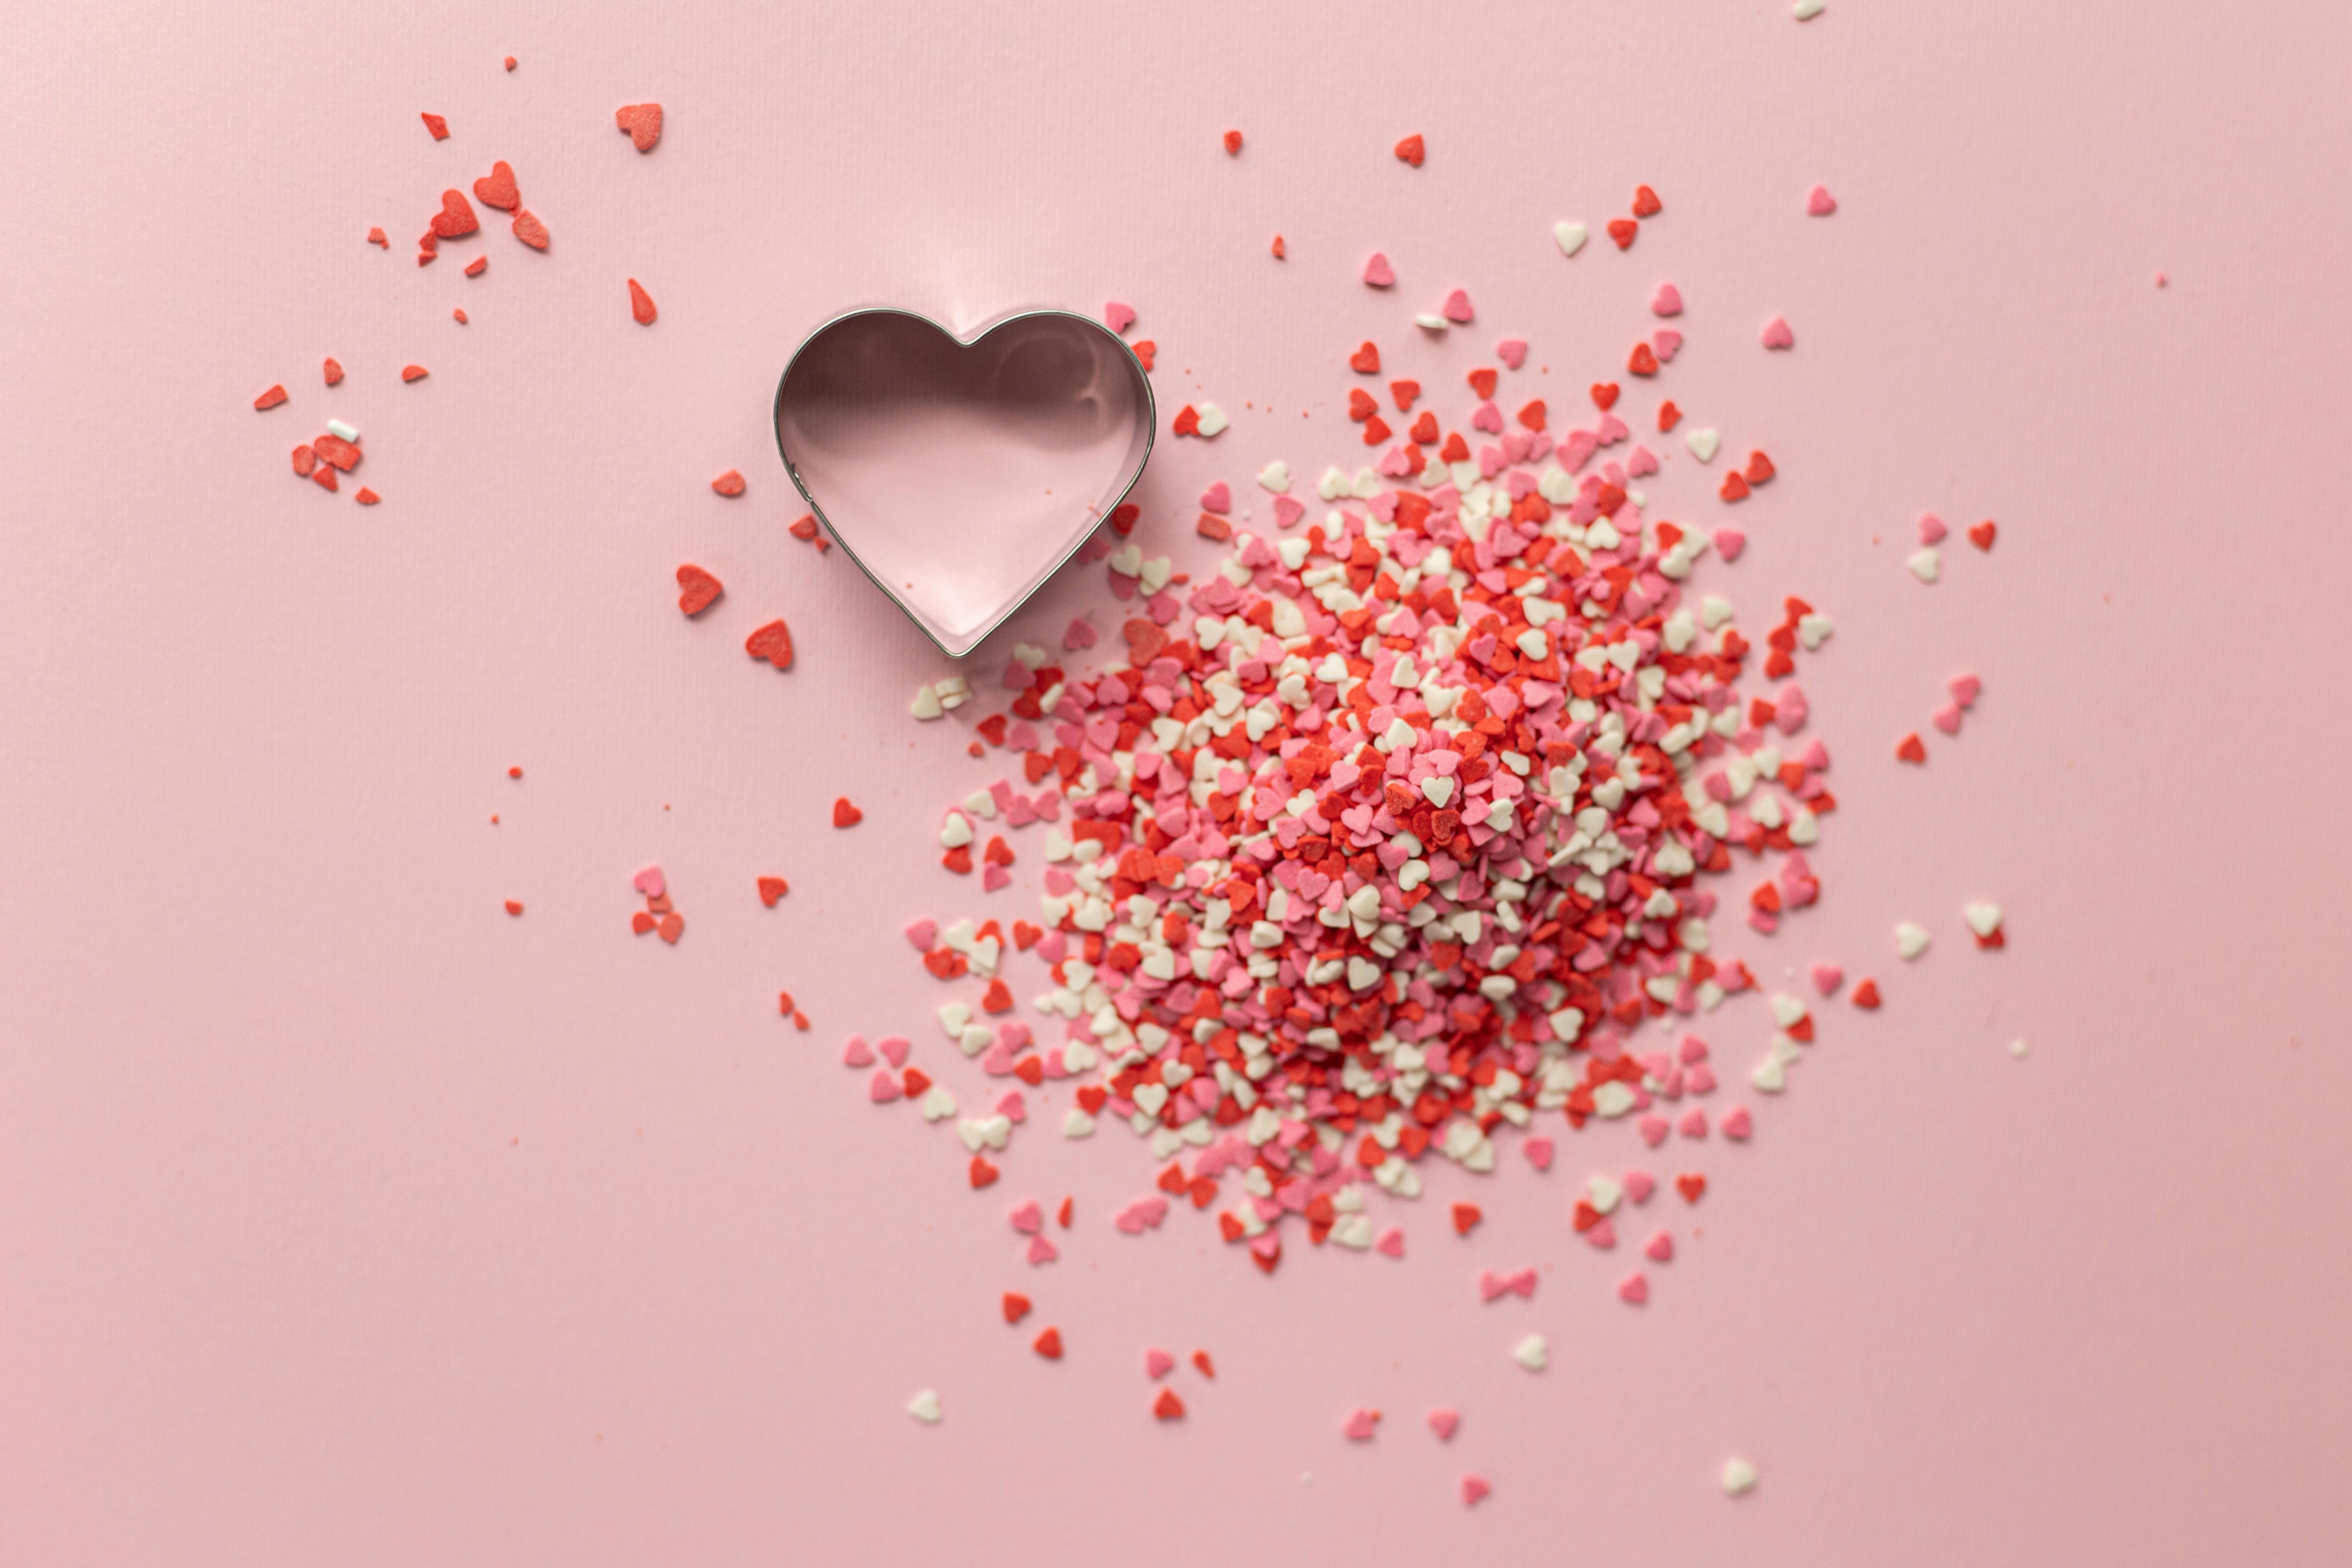 Confetti with heart shape on surface · Free Stock Photo